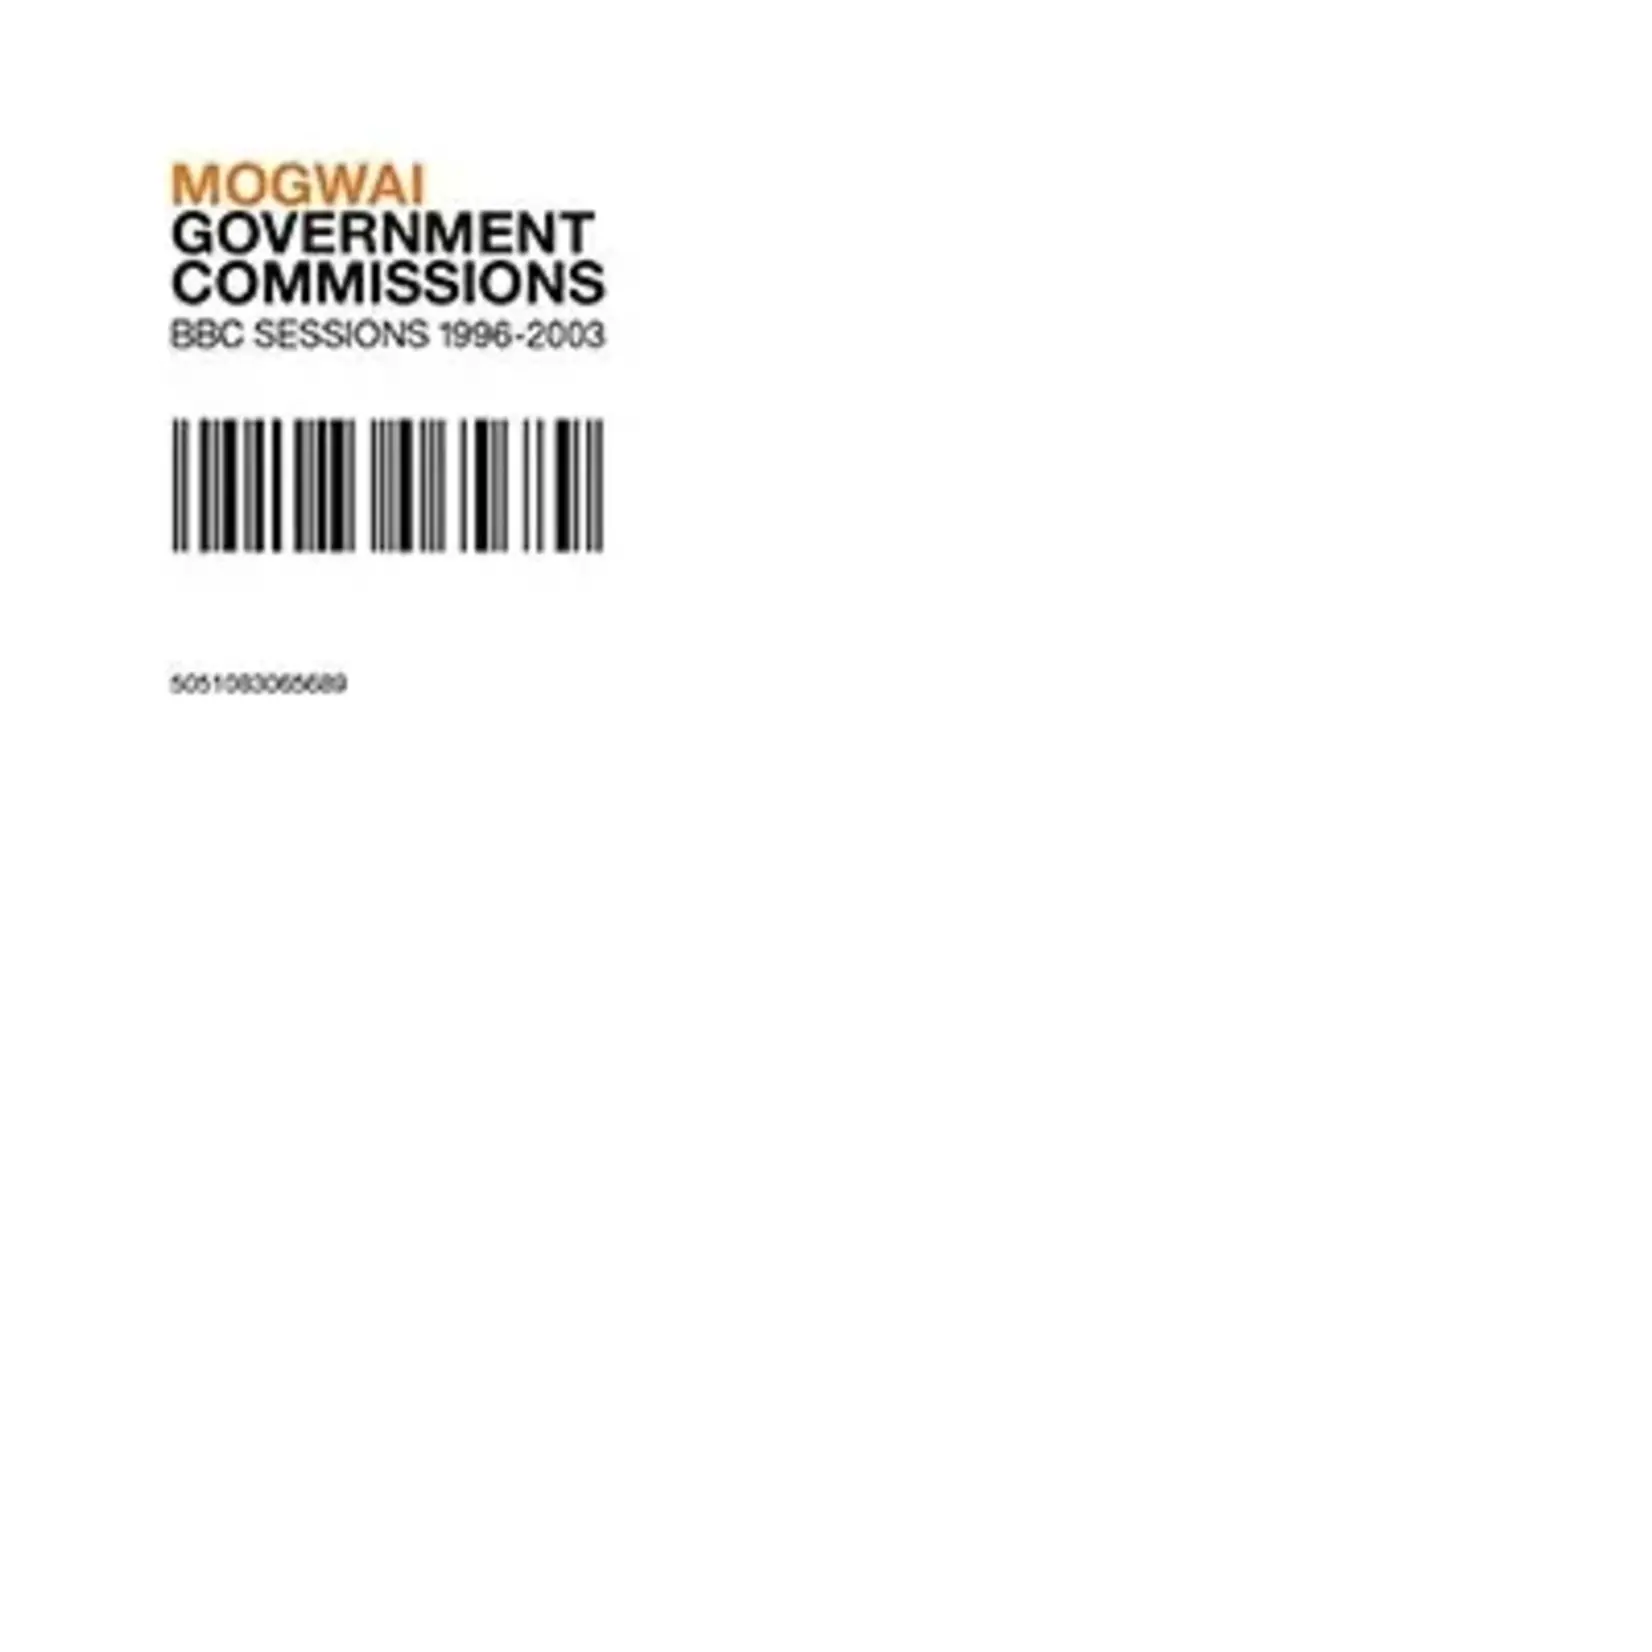 [New] Mogwai - Government Commissions, BBC Sessions 1996-2003 (2LP)